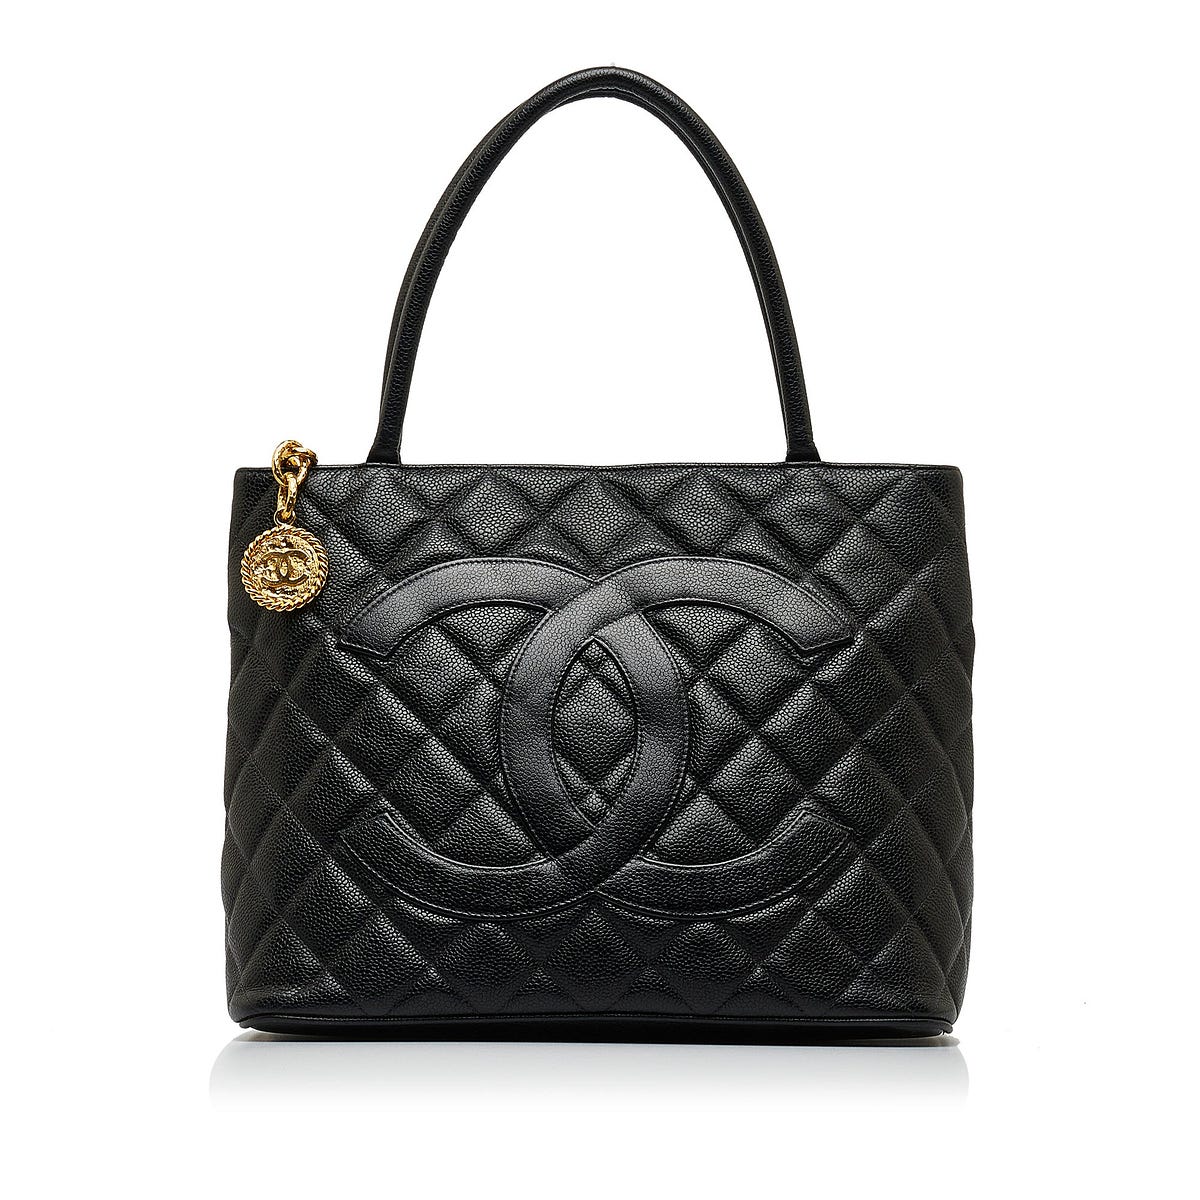 Chanel Tote Bags for Every Season: Seasonal Releases and Trend ...